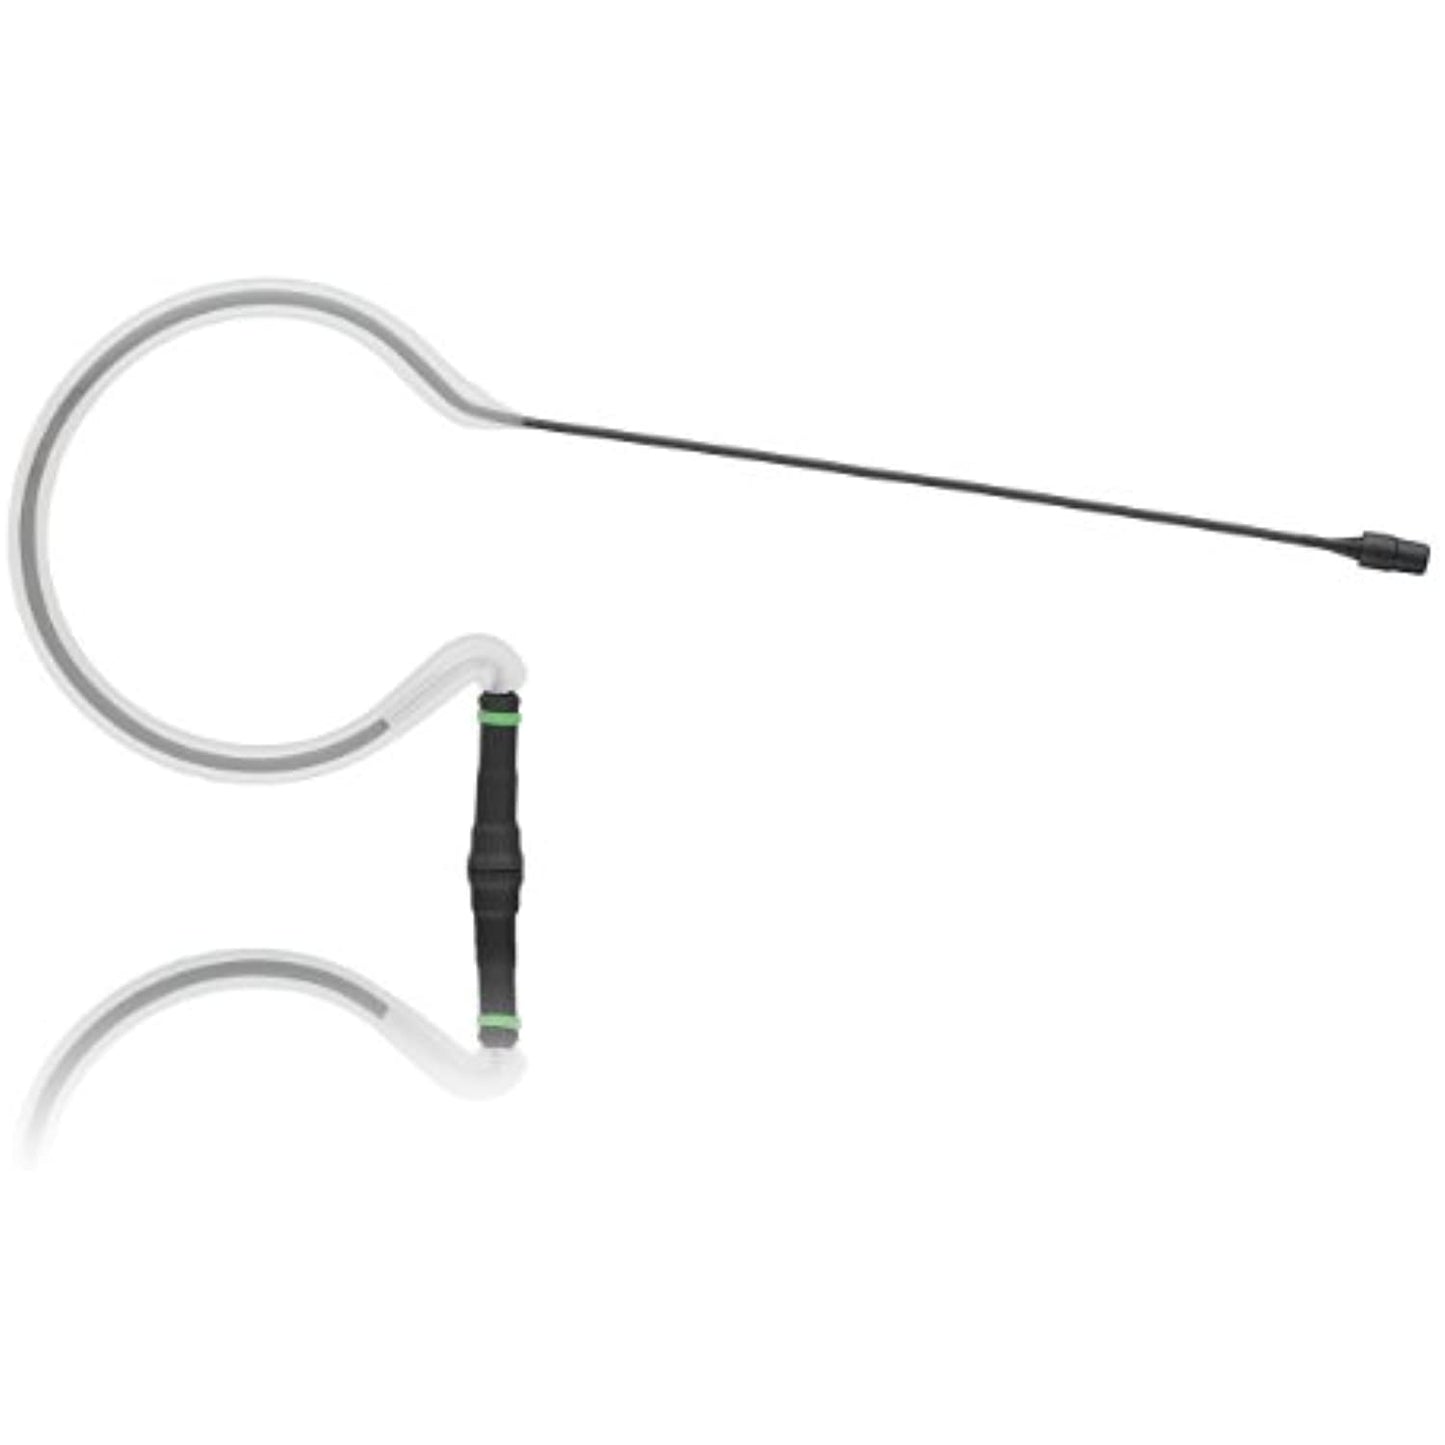 Countryman E6IDW6B2SE Soft E6i Directional Earset with 2 mm Cable for Sennheiser Transmitter (Black)